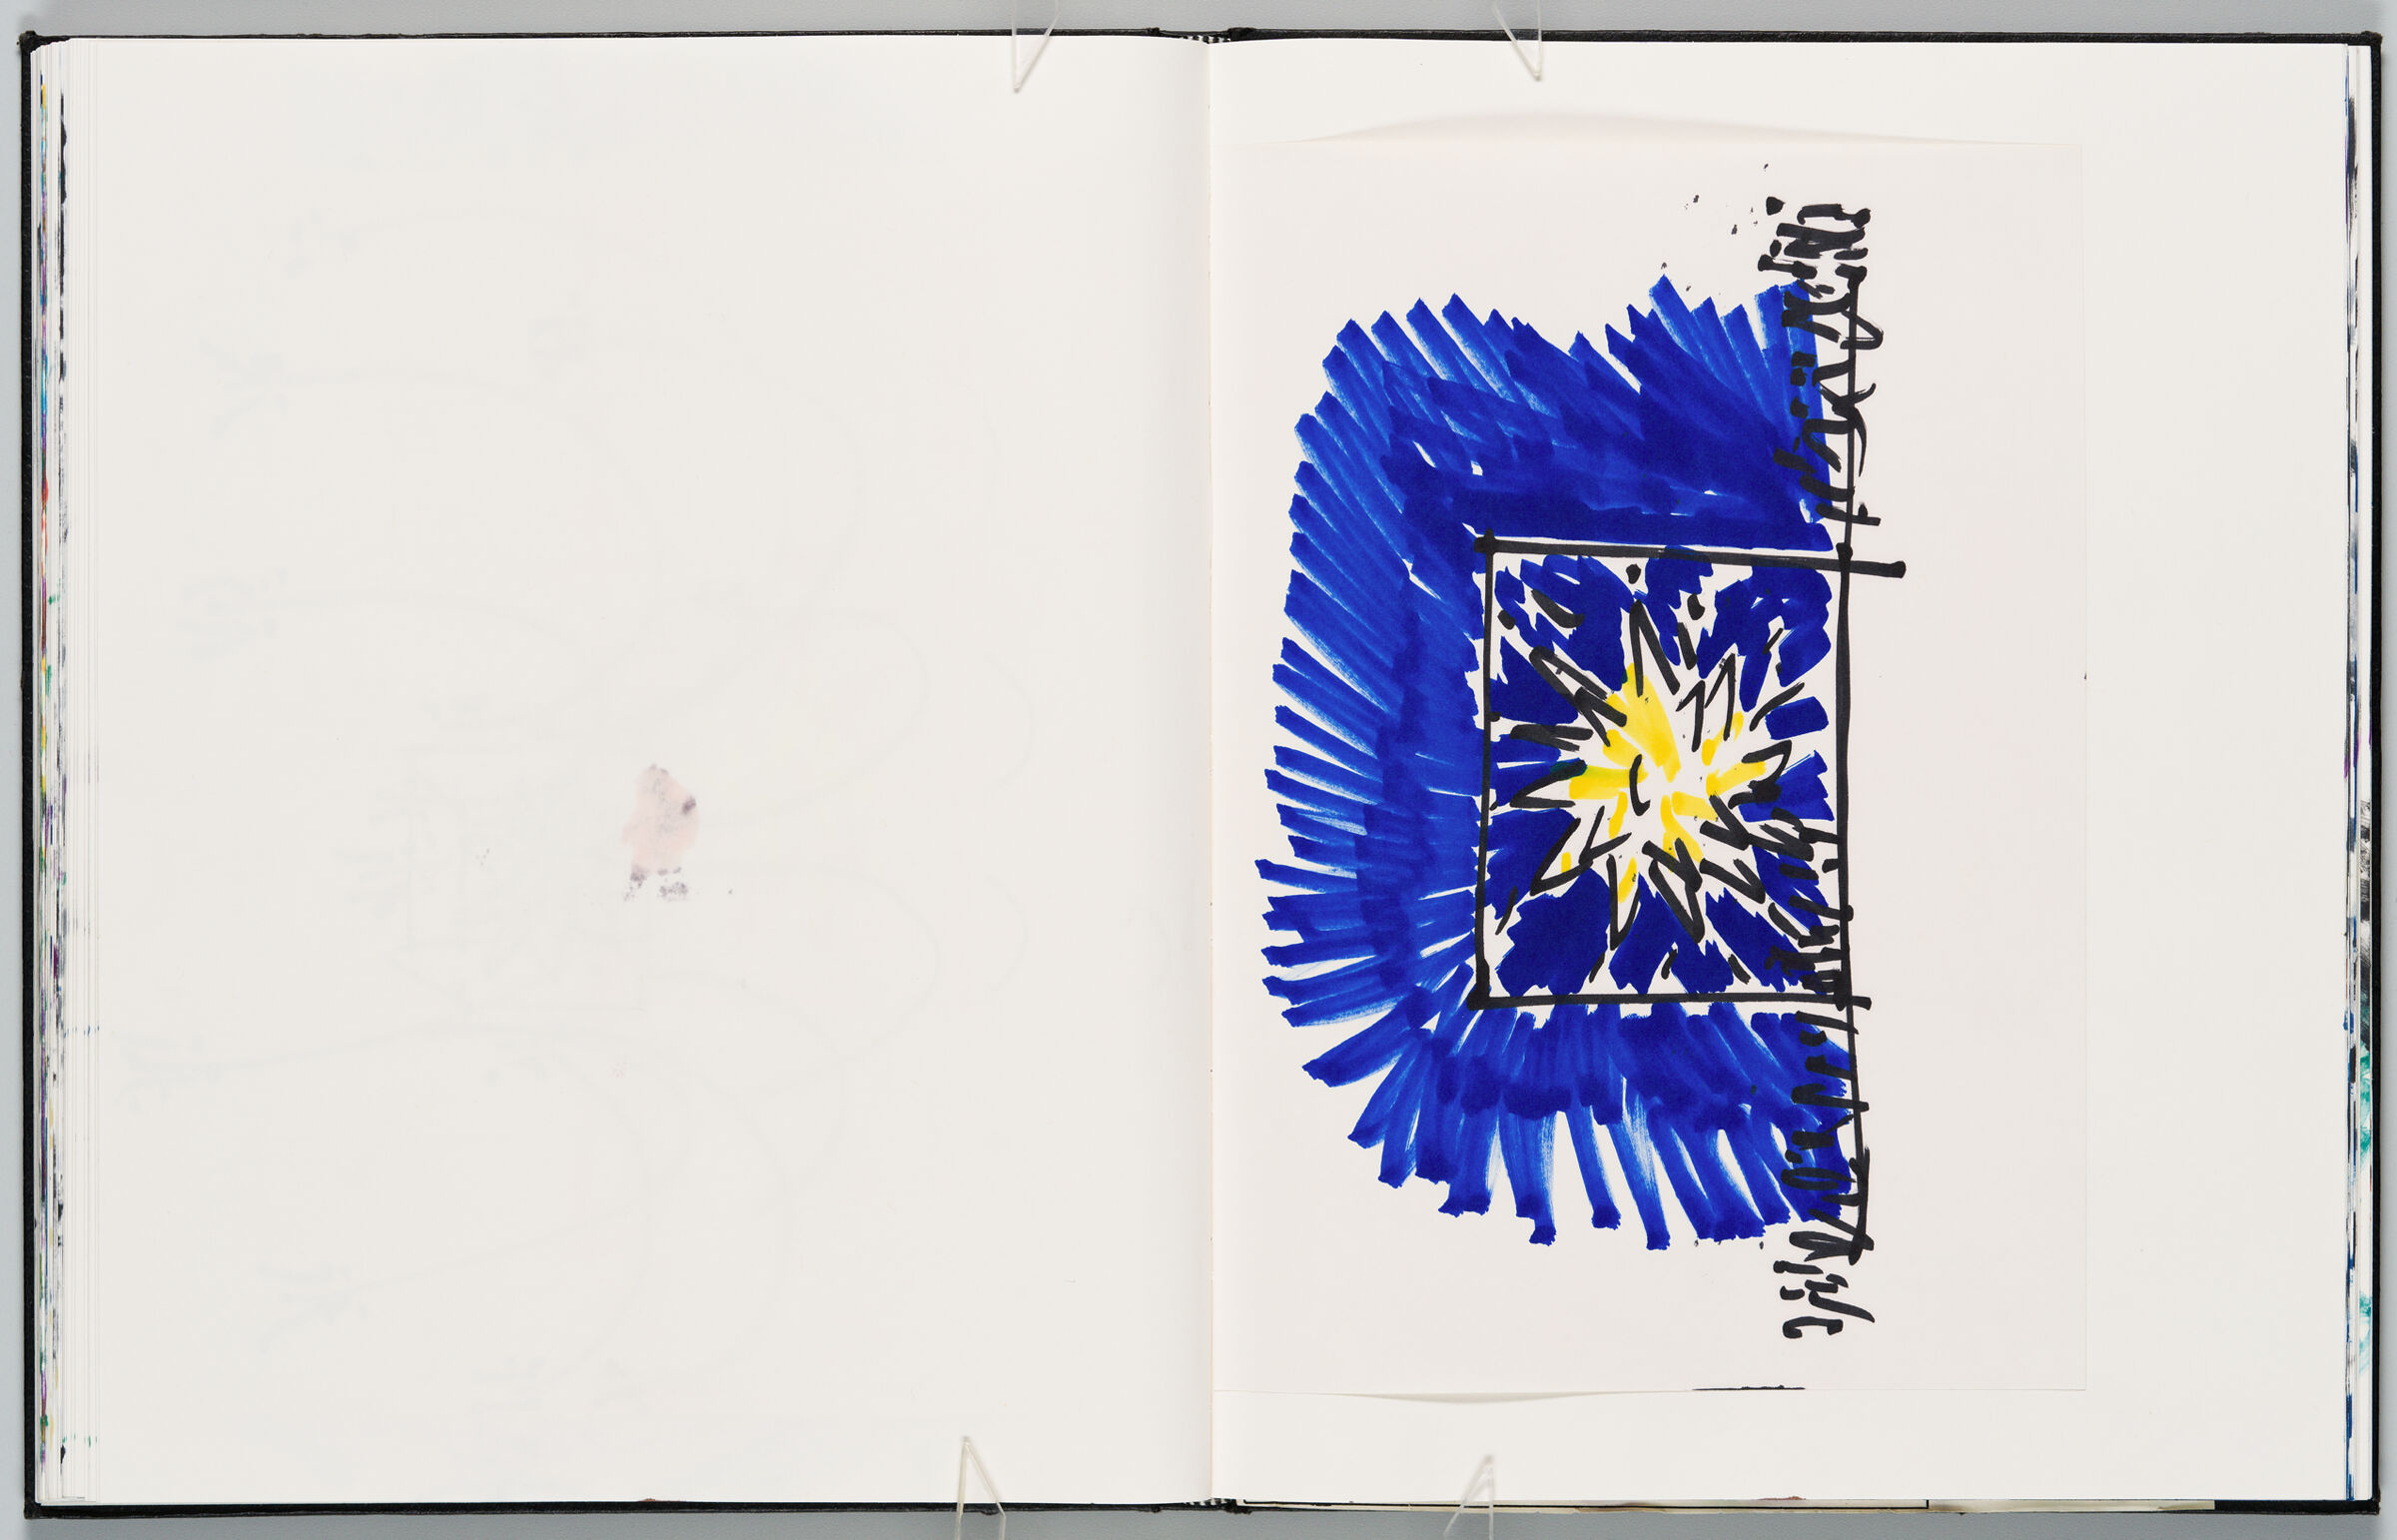 Untitled (Blank With Faint Color Transfer, Left Page); Untitled (Design For Korea Olympics On Adhered Page, Right Page)